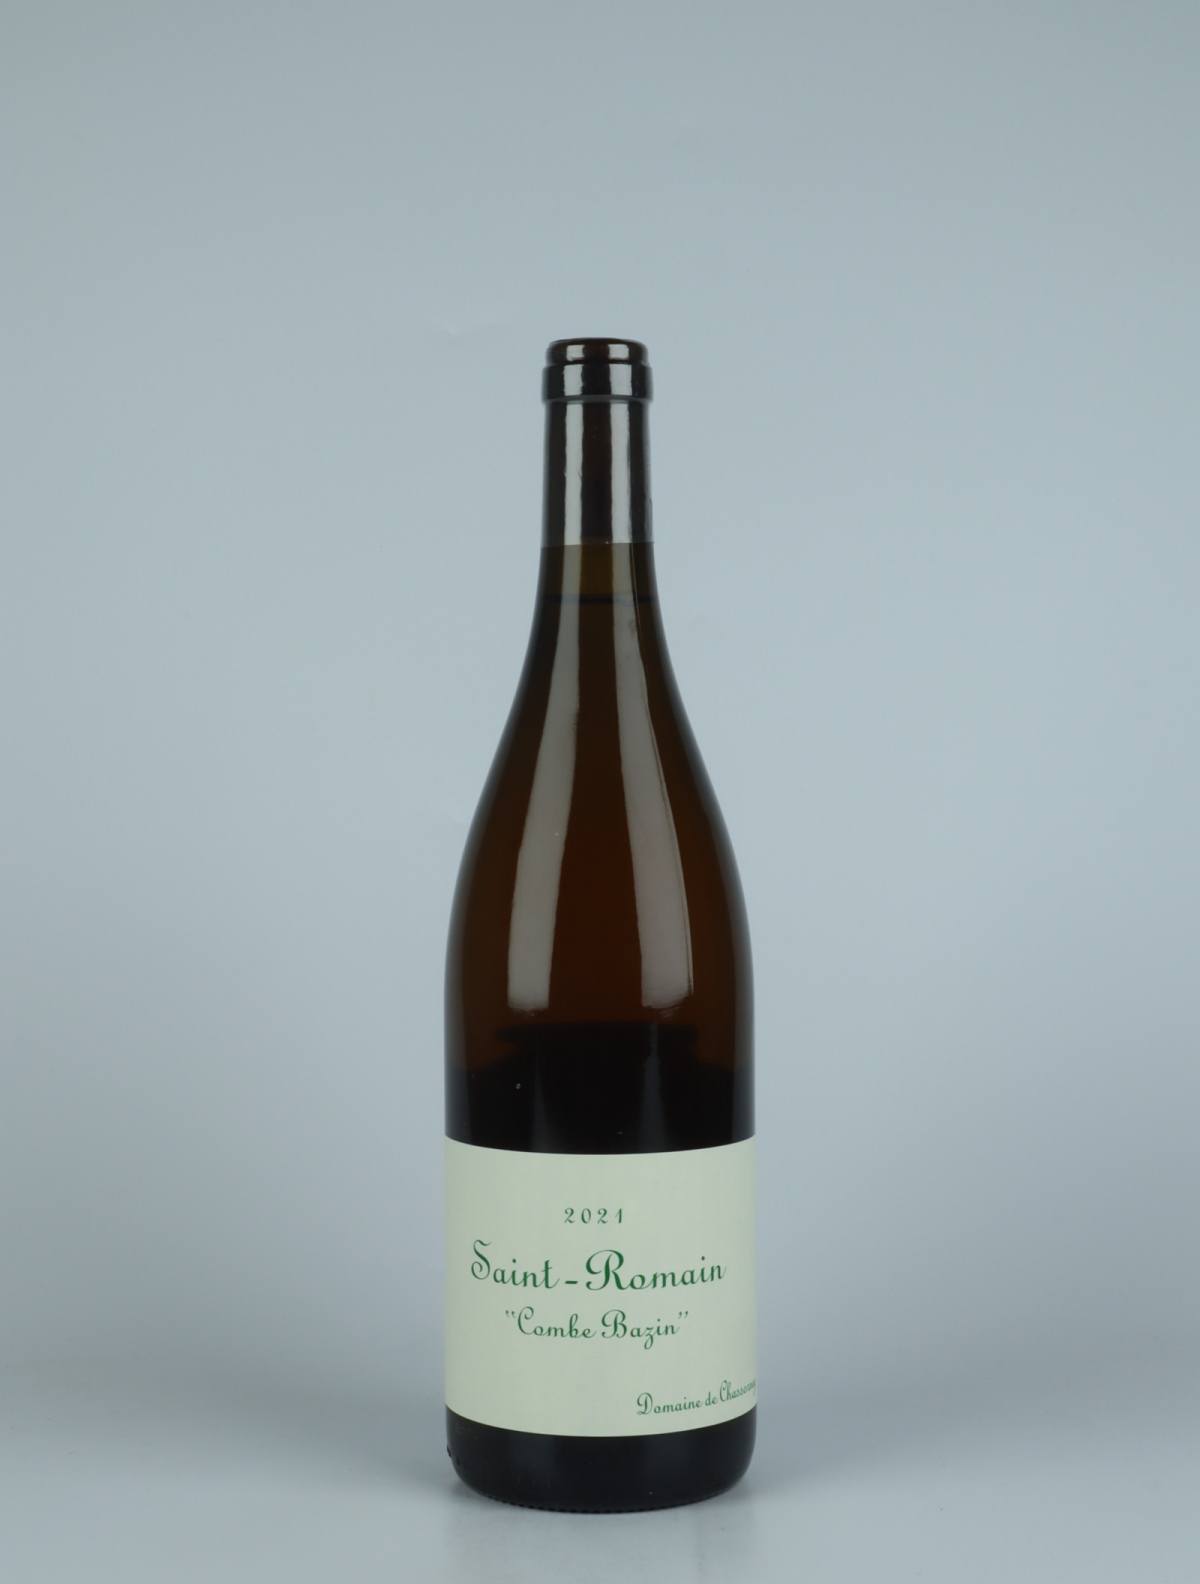 A bottle 2021 Saint Romain Blanc - Combe Bazin White wine from Domaine de Chassorney, Burgundy in France